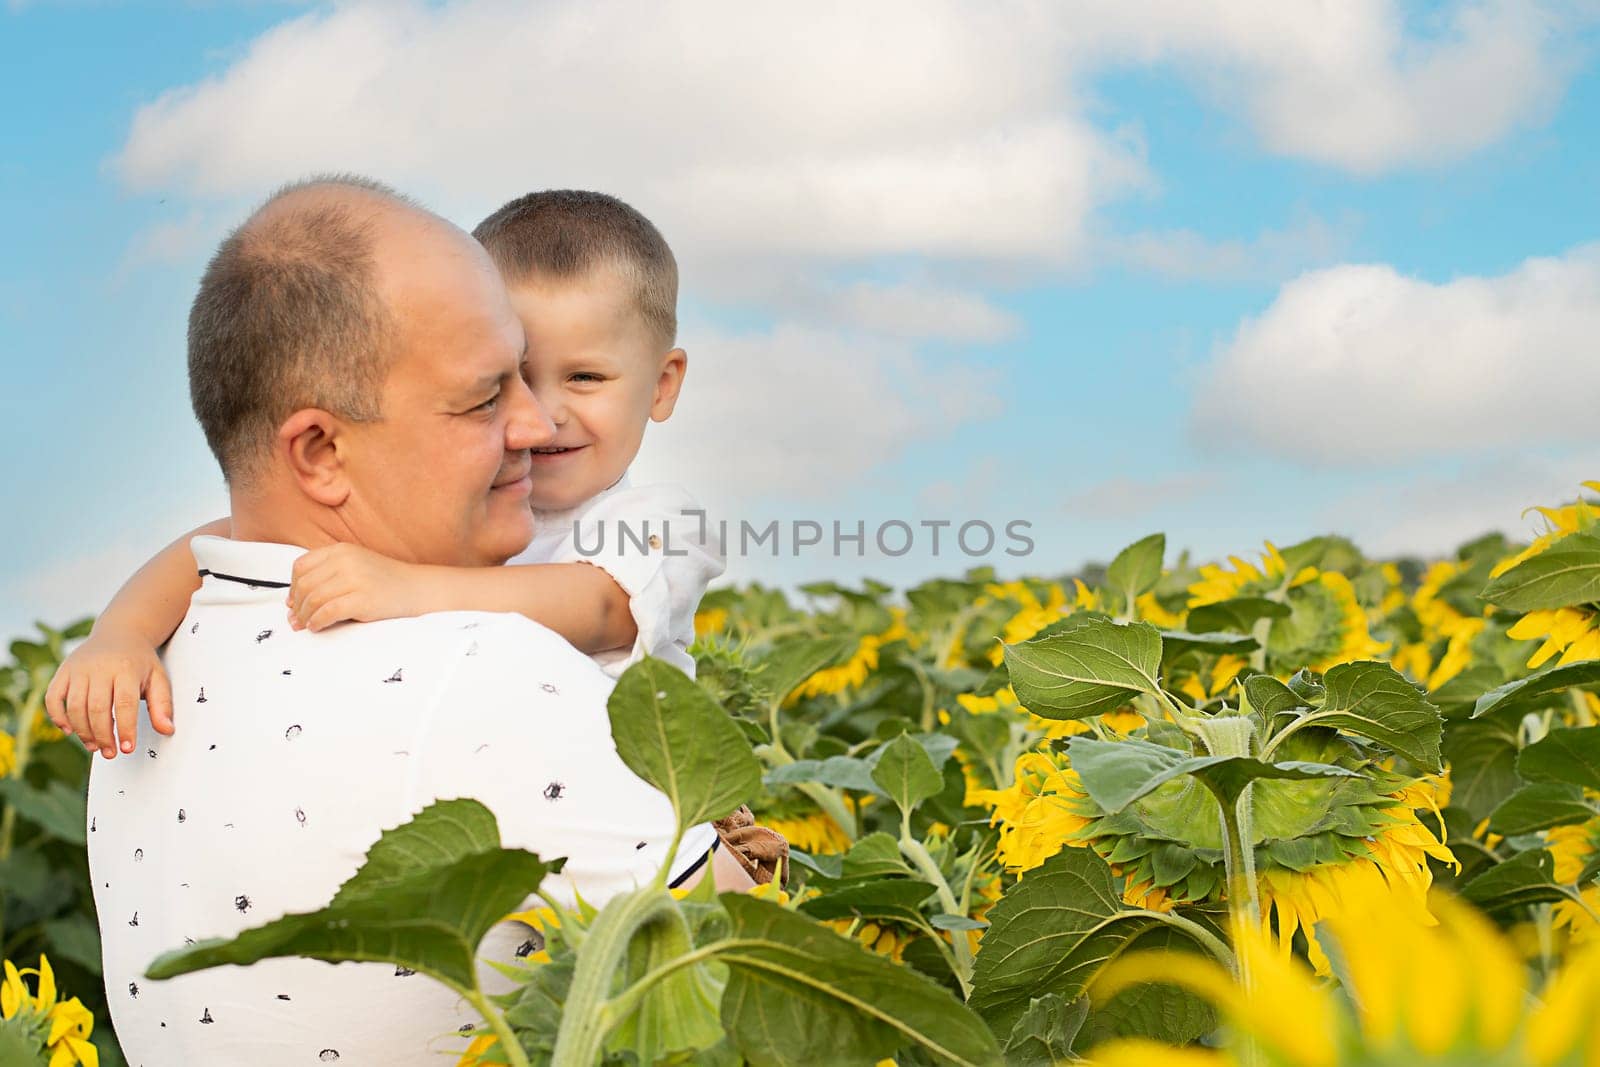 Father's day concept. A little boy in his father's arms gently hugs and cuddles, standing in a field with yellow sunflowers against the background of a blue sky. A symbol of peace. Symbol of Ukraine. by ketlit